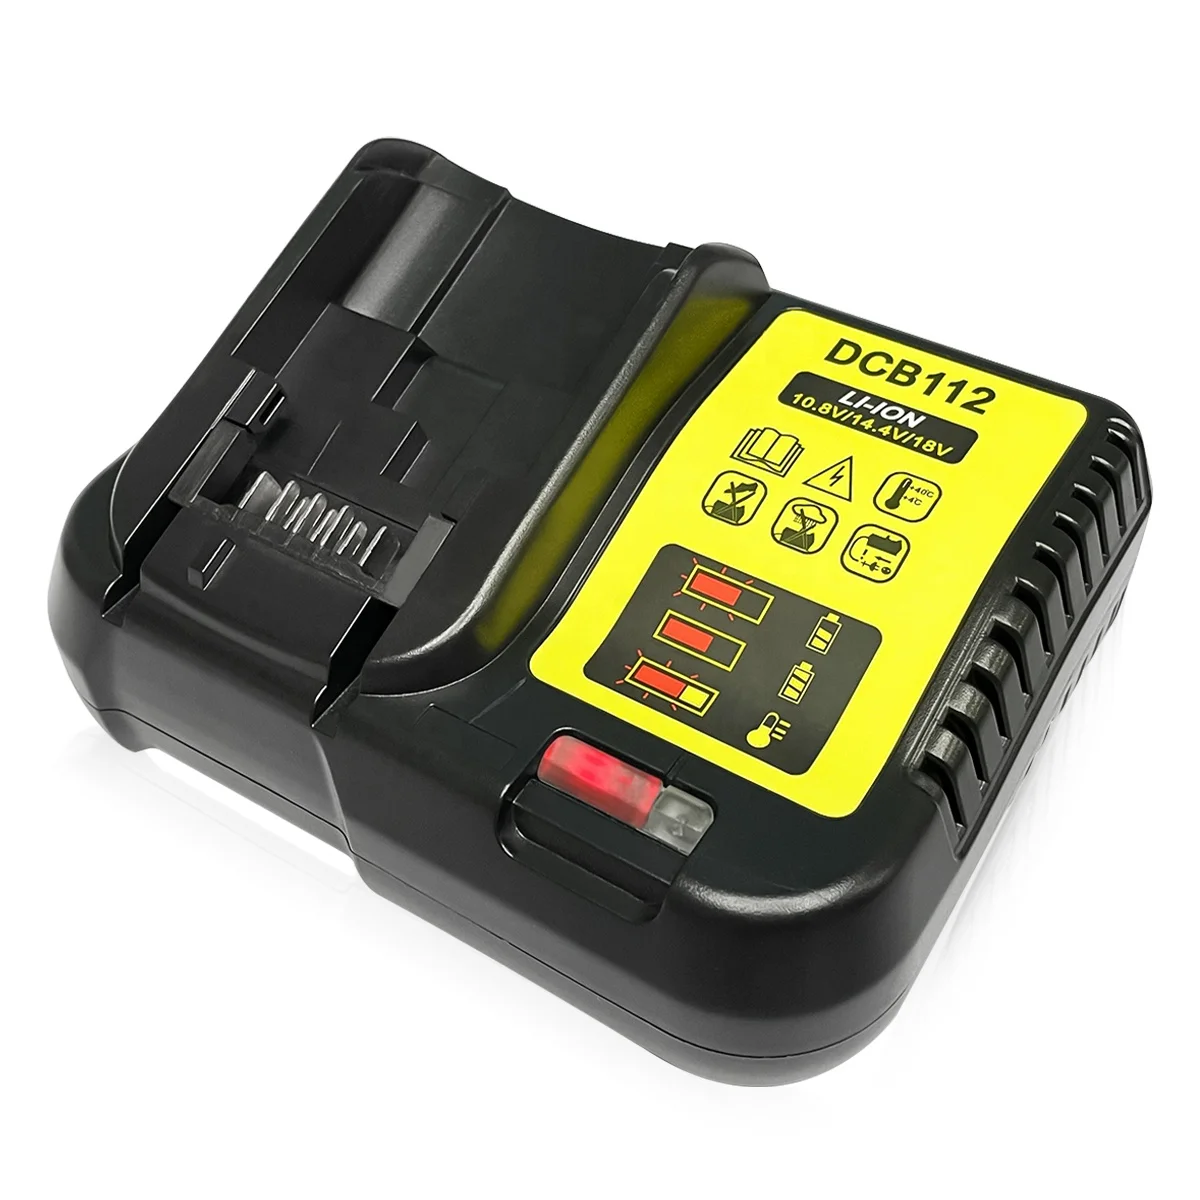 

DCB112 12V-20V MAX Battery Charger Replacement for DeWalt 20V Max Battery Charger DCB206 DCB205 DCB204 DCB203 DCB200 DCB120, Black